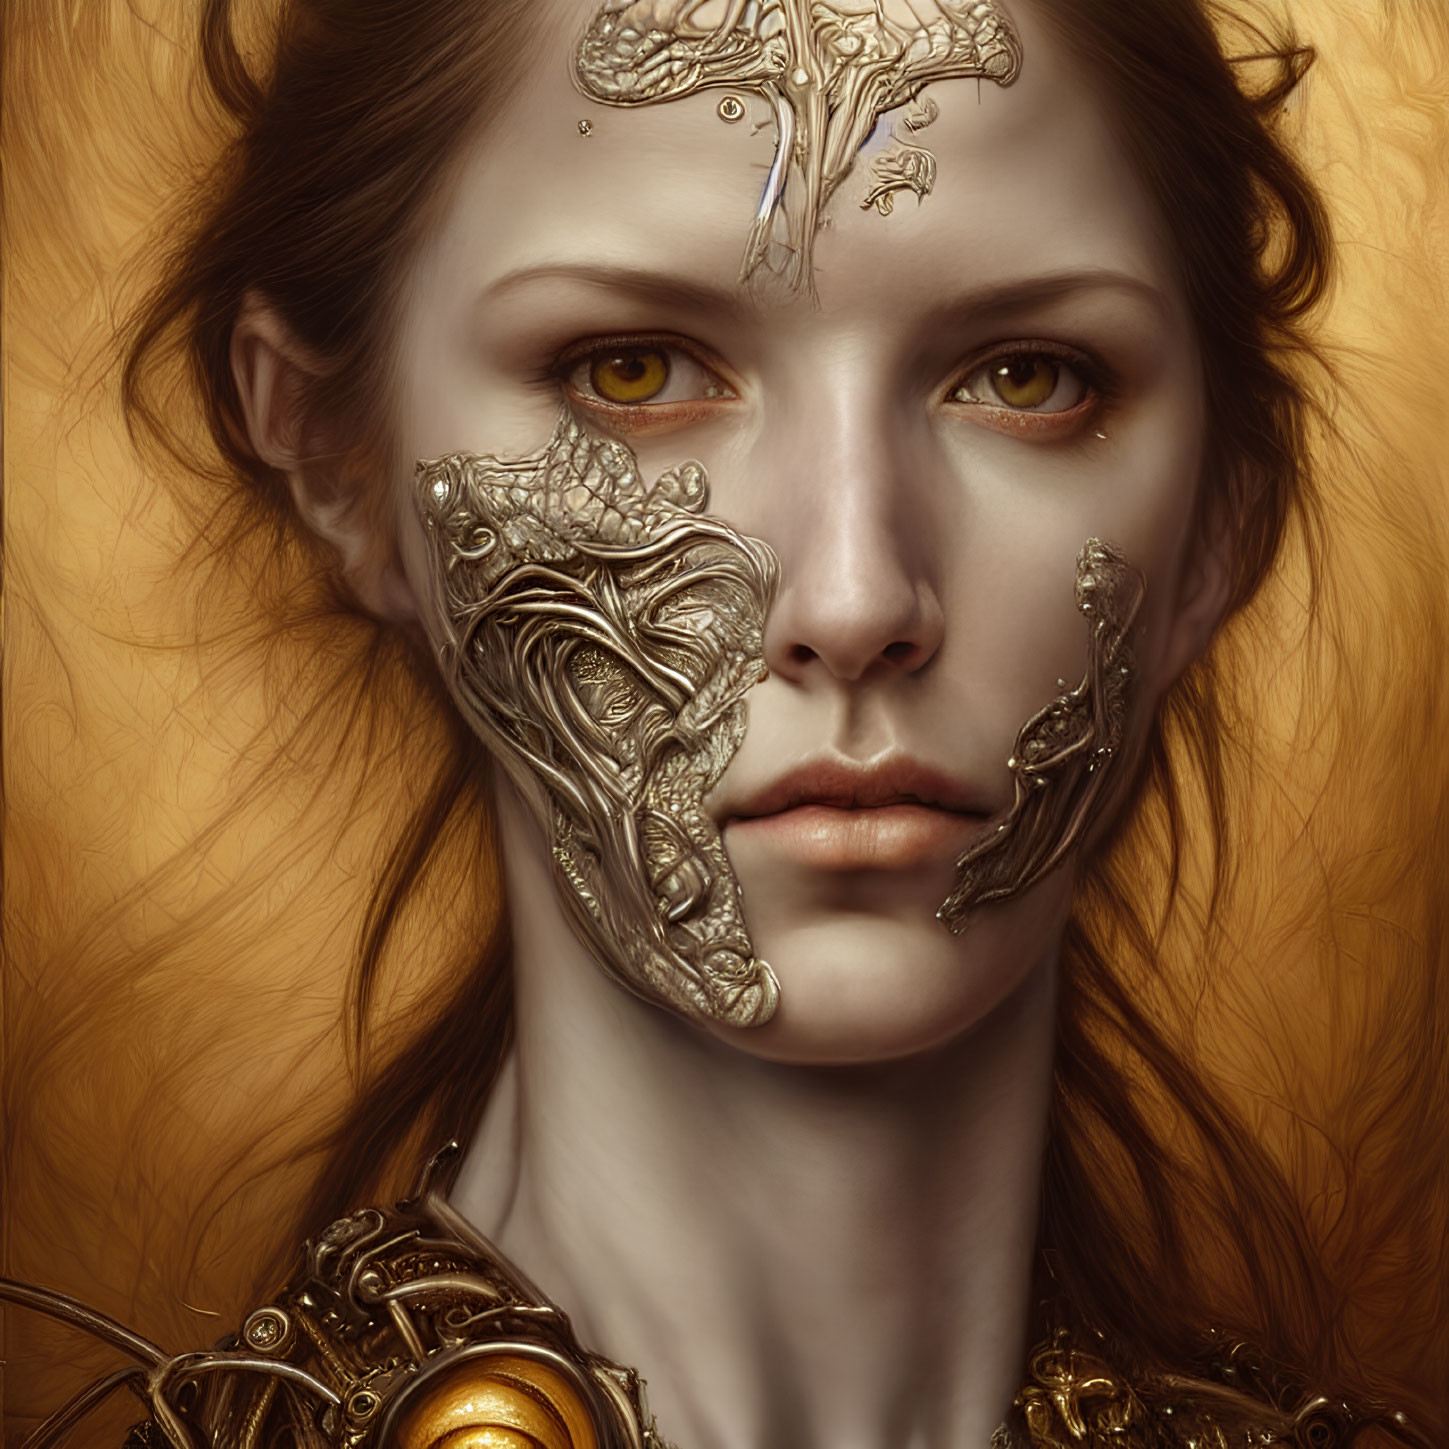 Portrait of a woman with fantasy metallic facial adornments and intense amber eyes